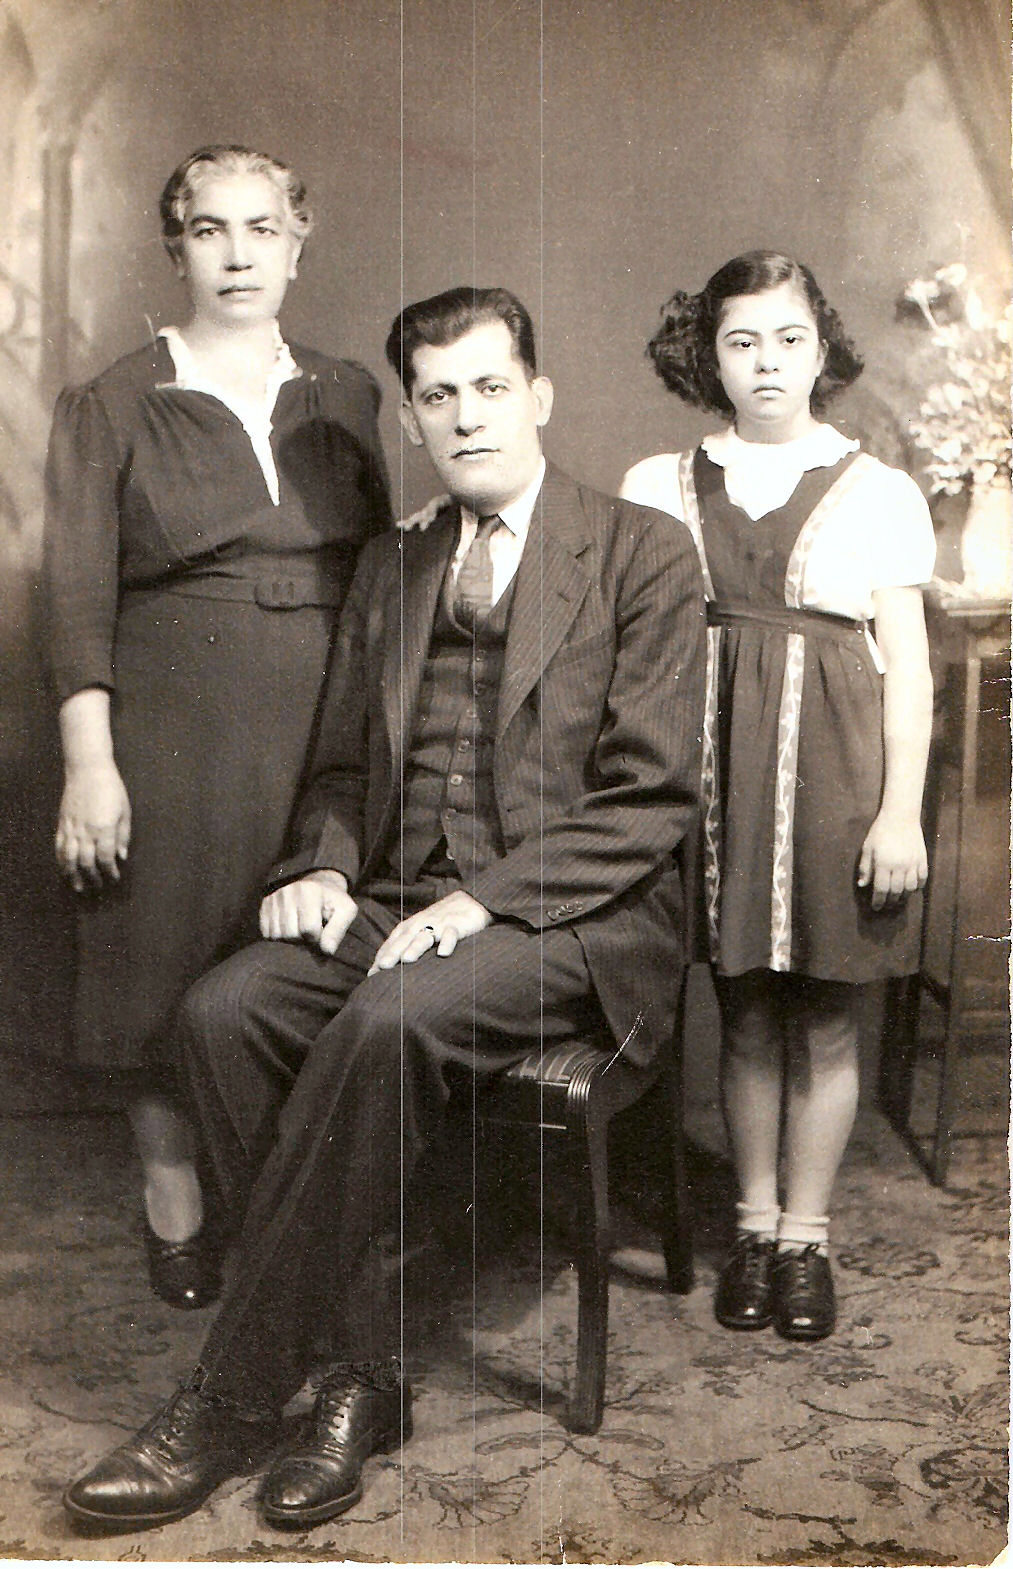 Virginia, Harry, and Rose Patoyian, 1930's